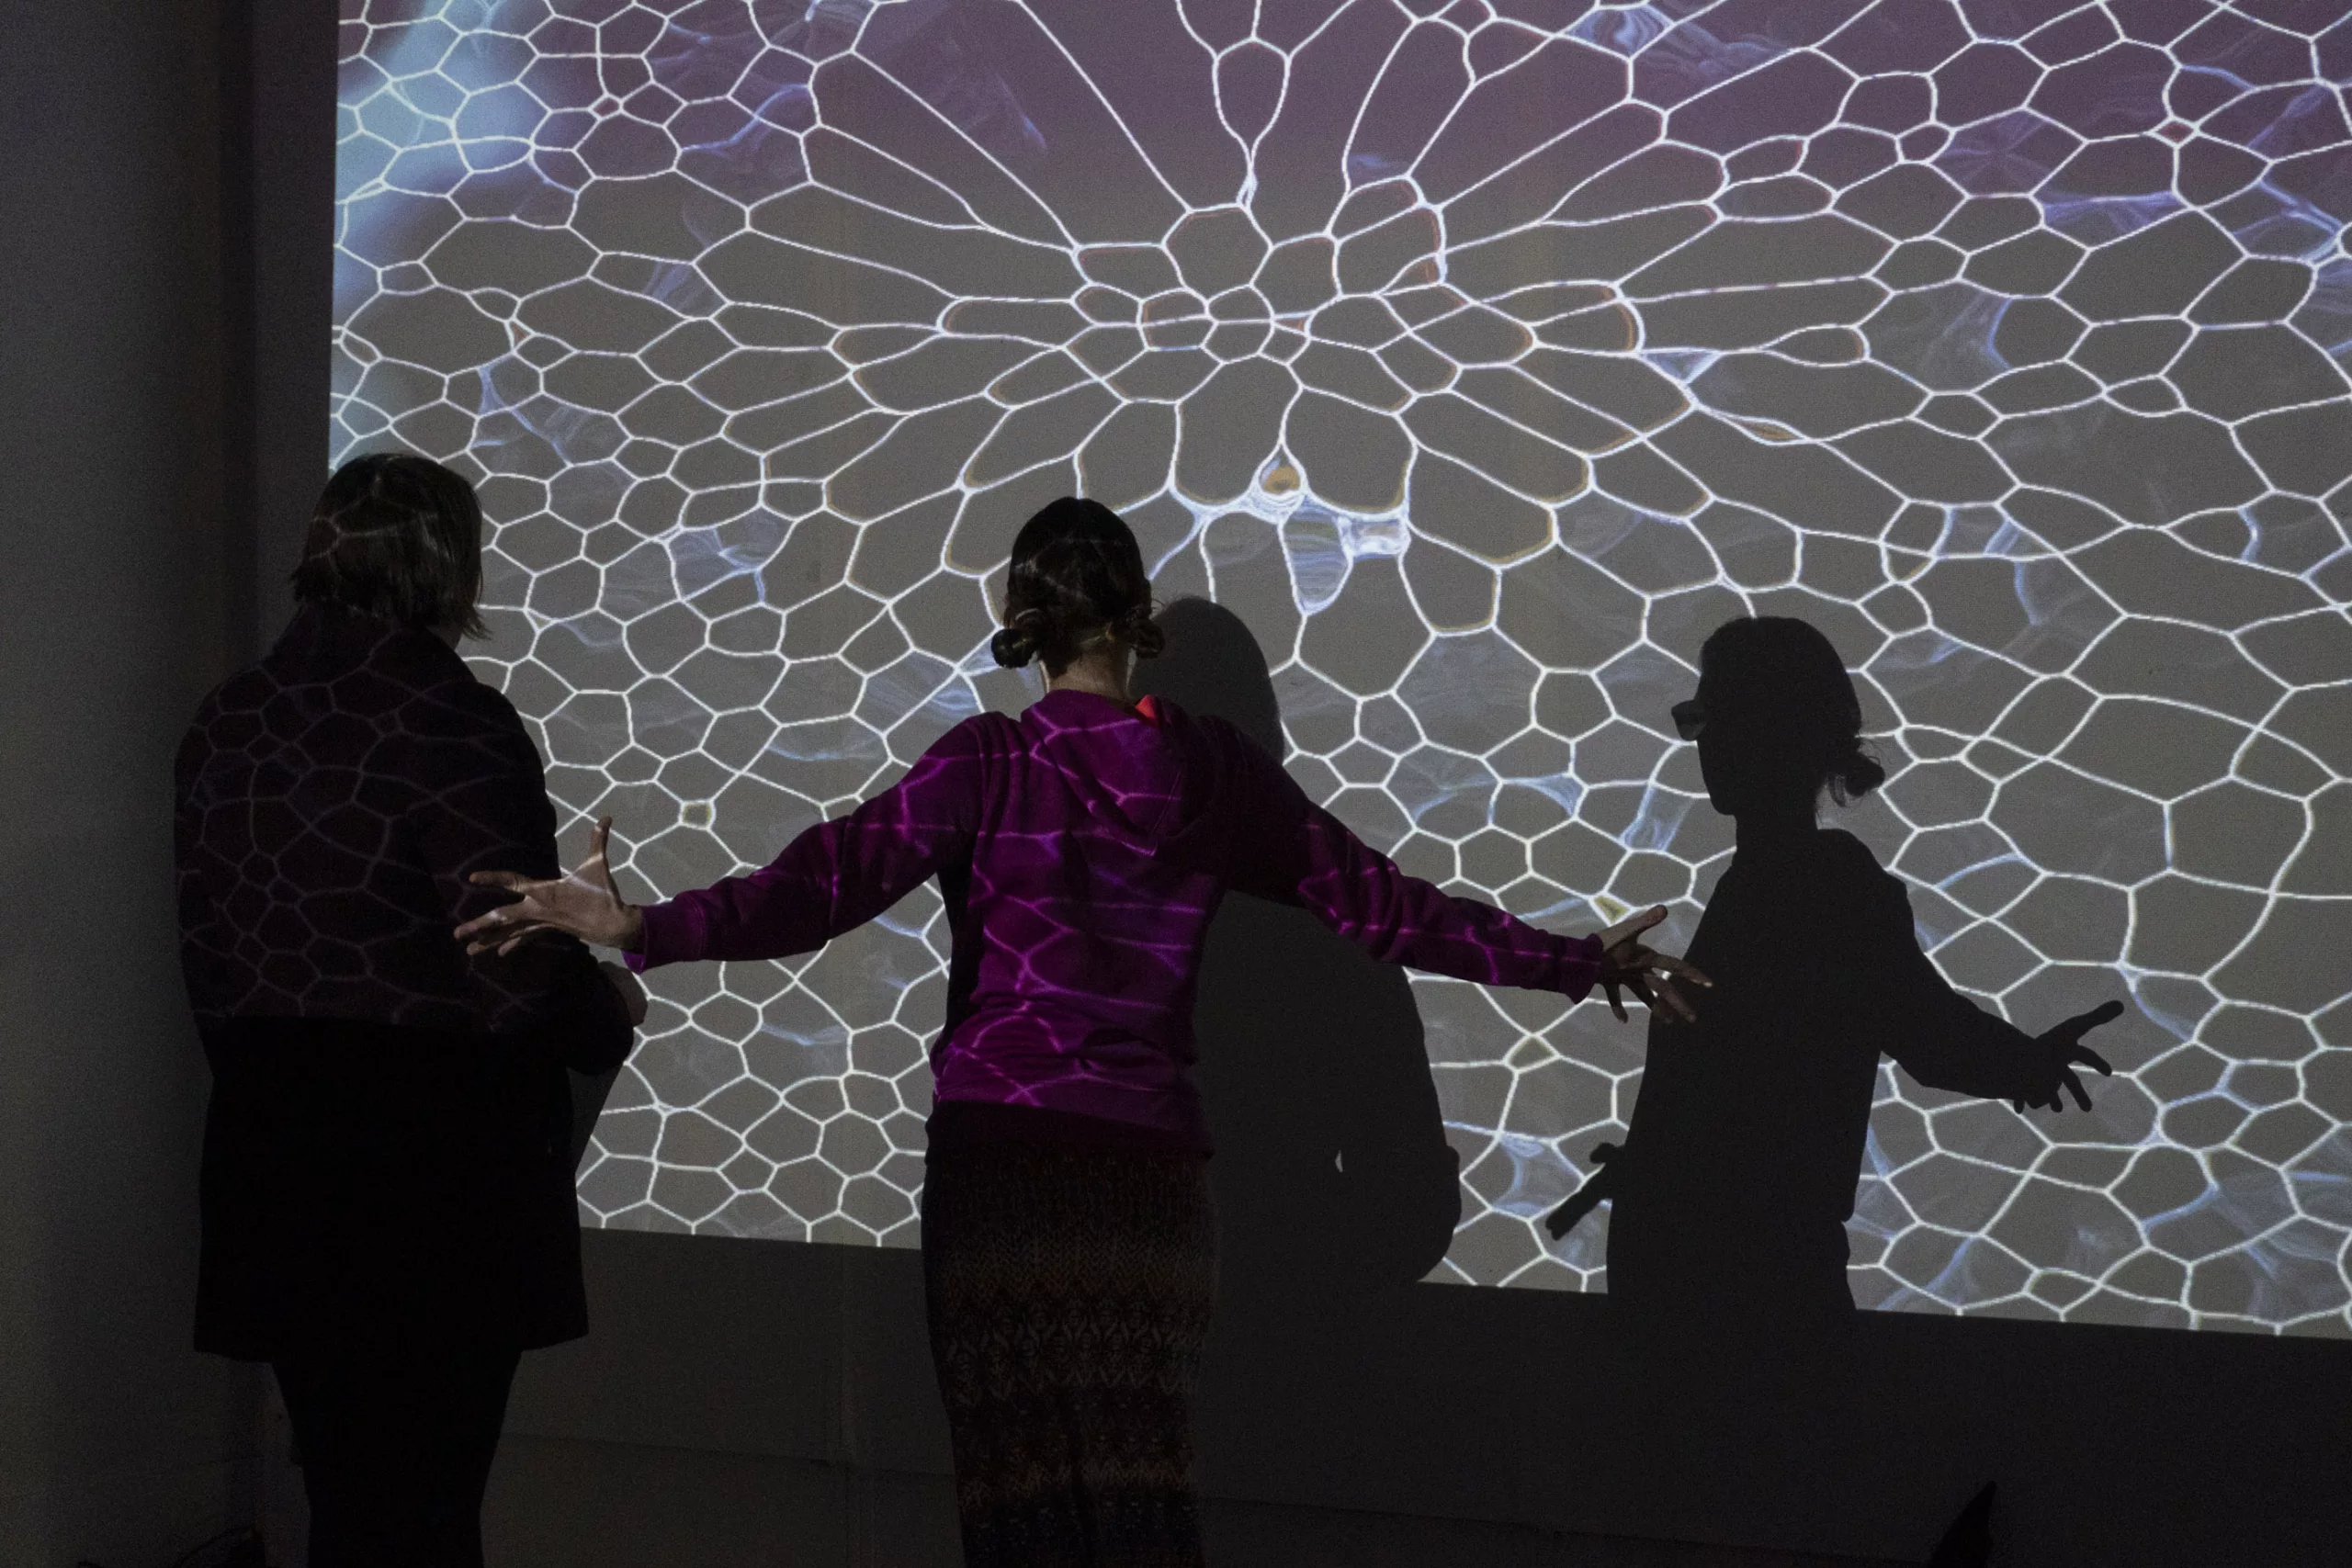 Two people stand with their backs to the camera, facing a projected video on a wall. The person near the center stretches their arms out wide. The video features an organic mesh web.